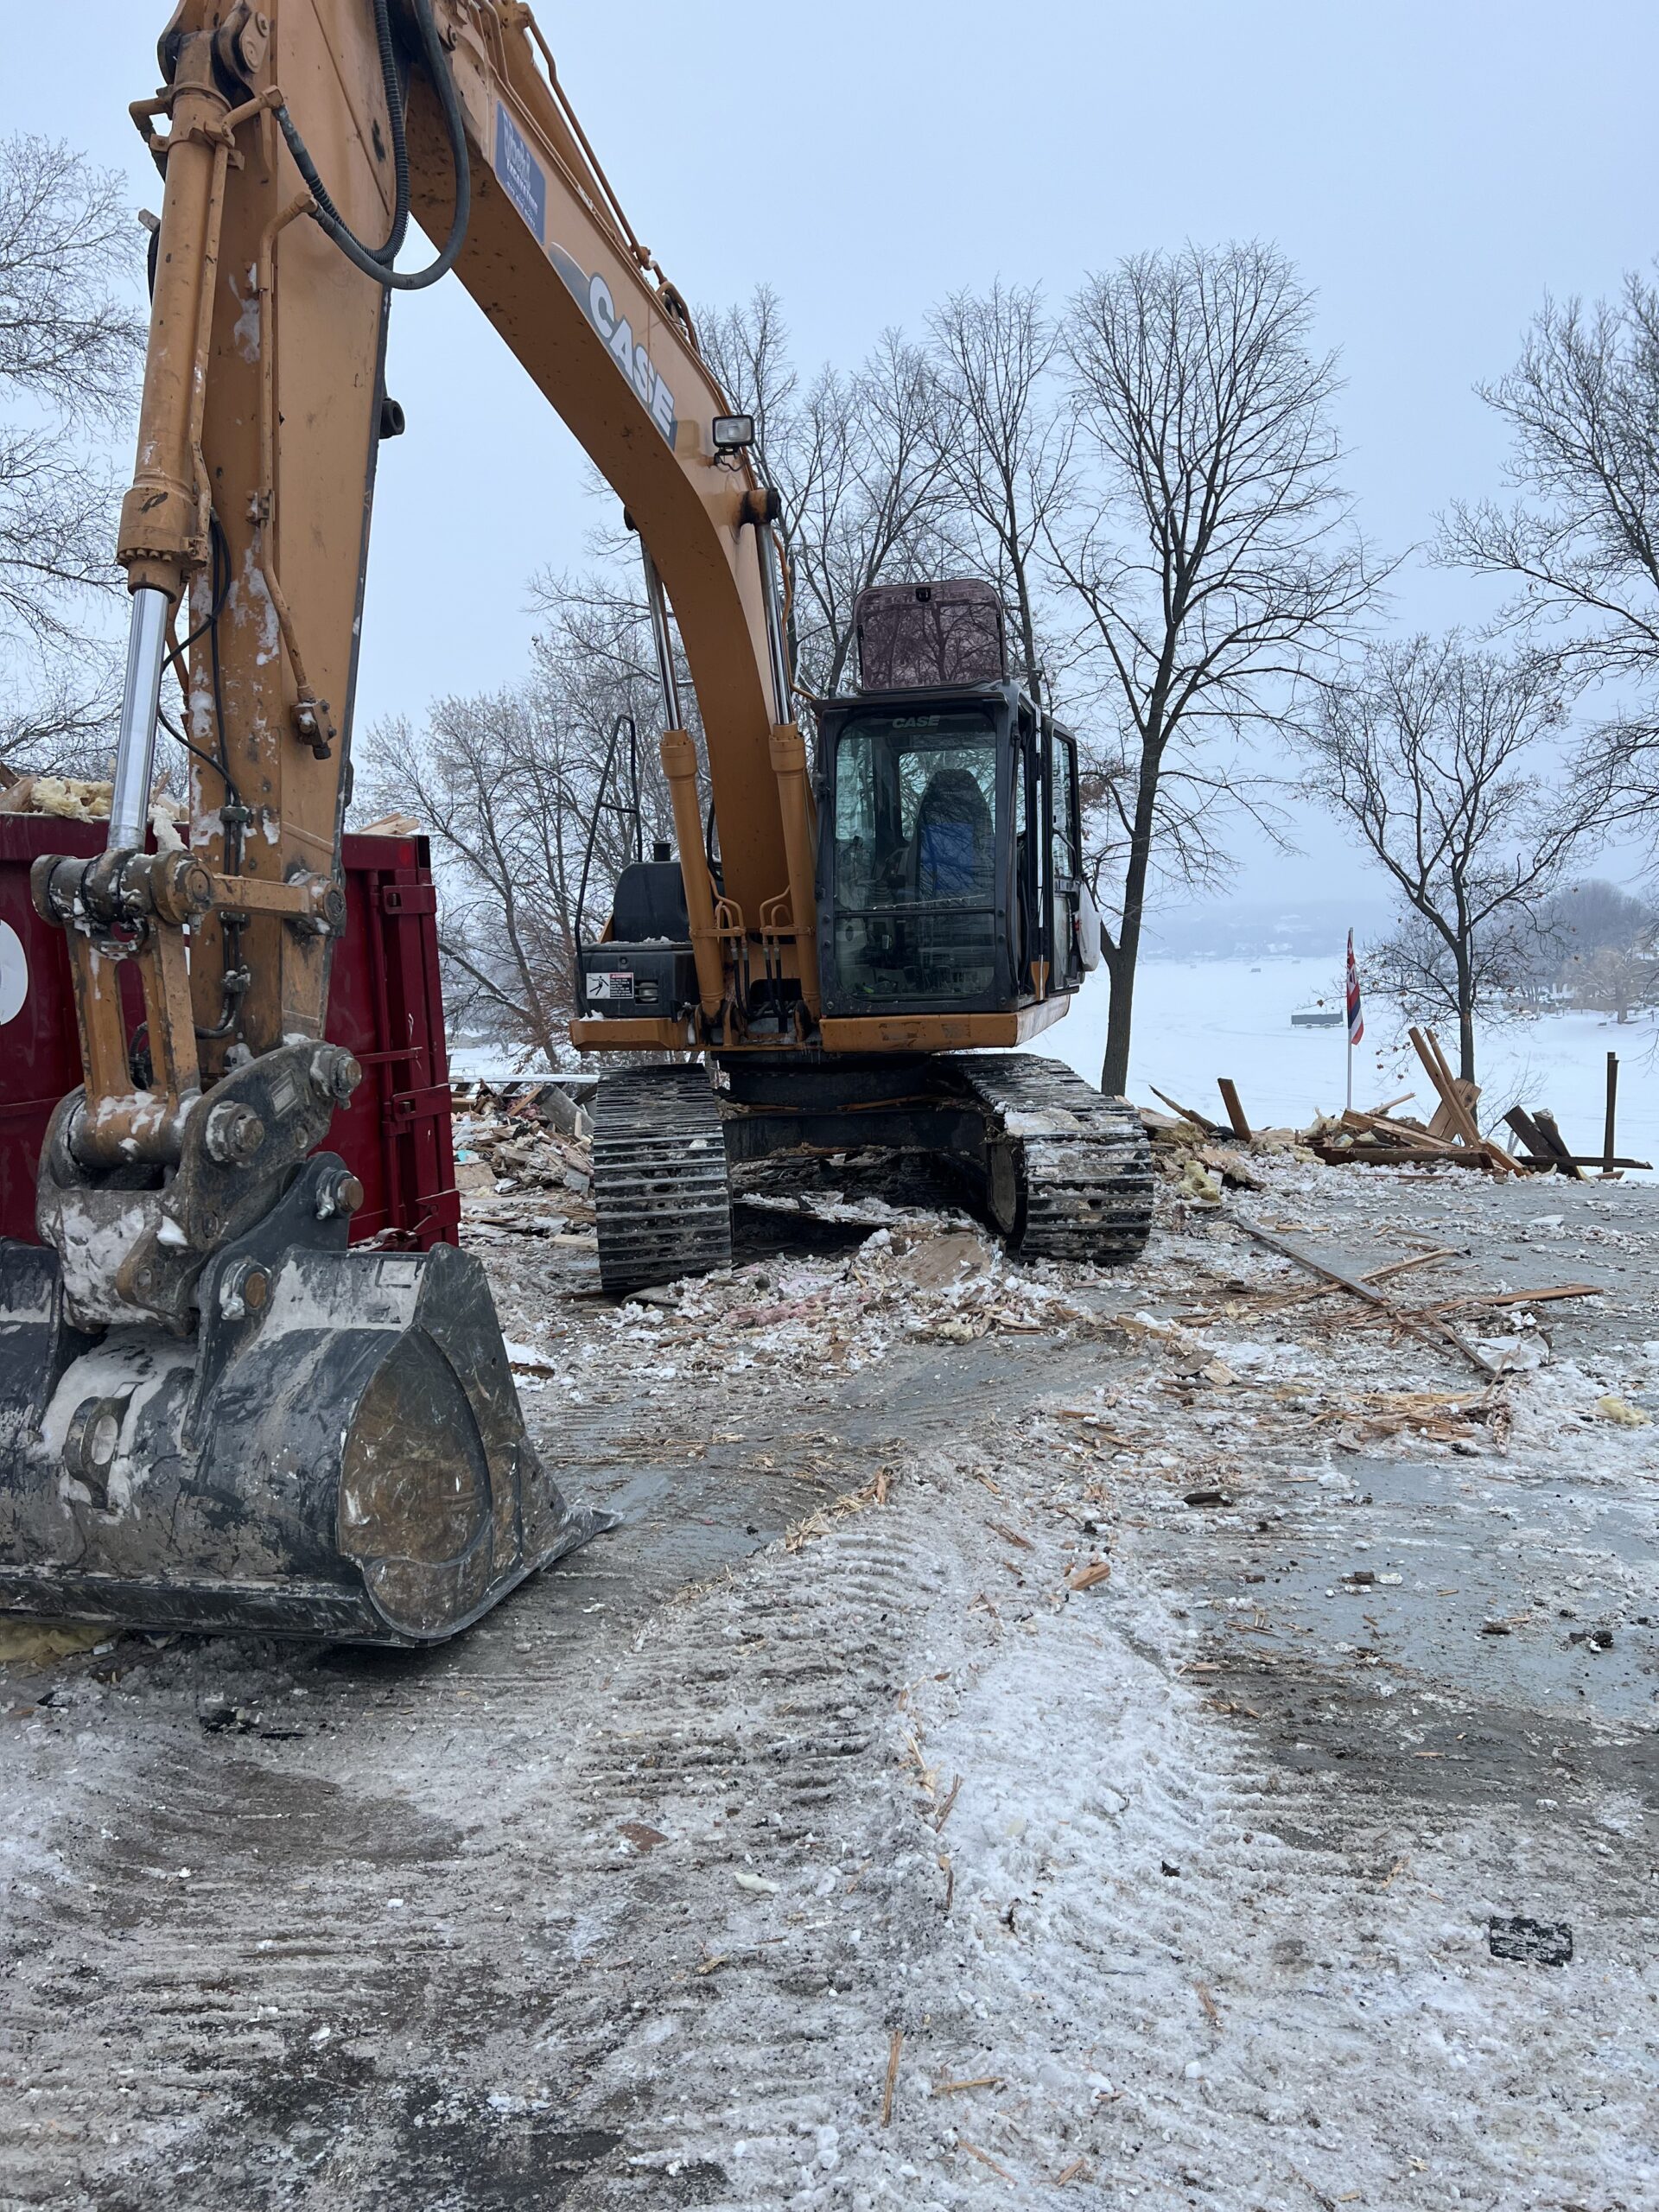 Excavation, Digging, Land Clearing and soil removal services for residential and commercial properties in the Twin Cities metro area from Voehl Construction Inc.